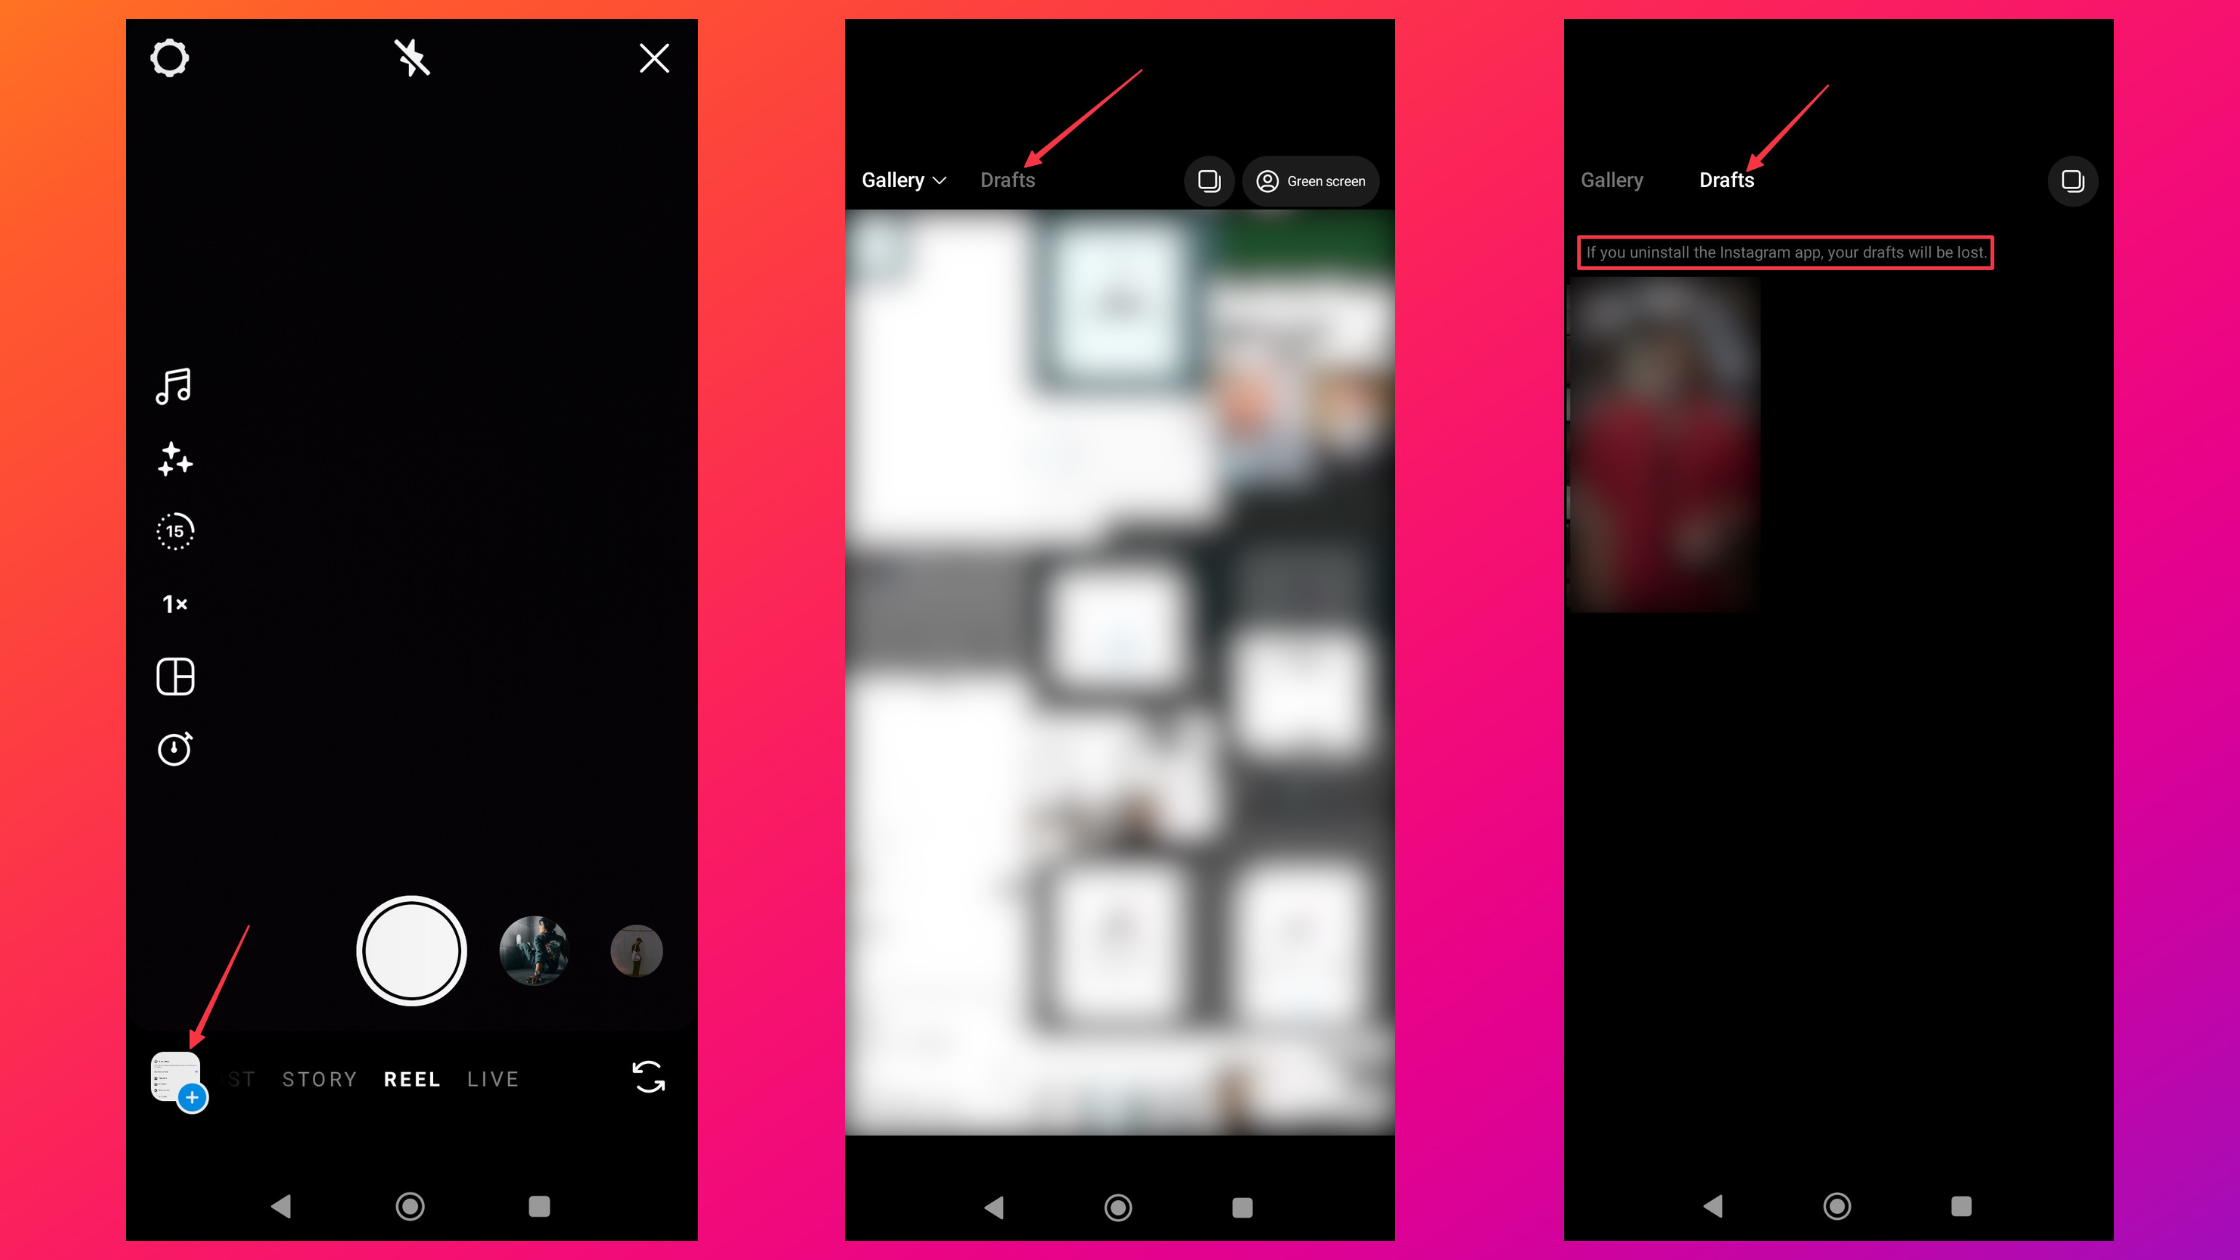 Remote.tools shows how to find reels drafts on Instagram app for Android